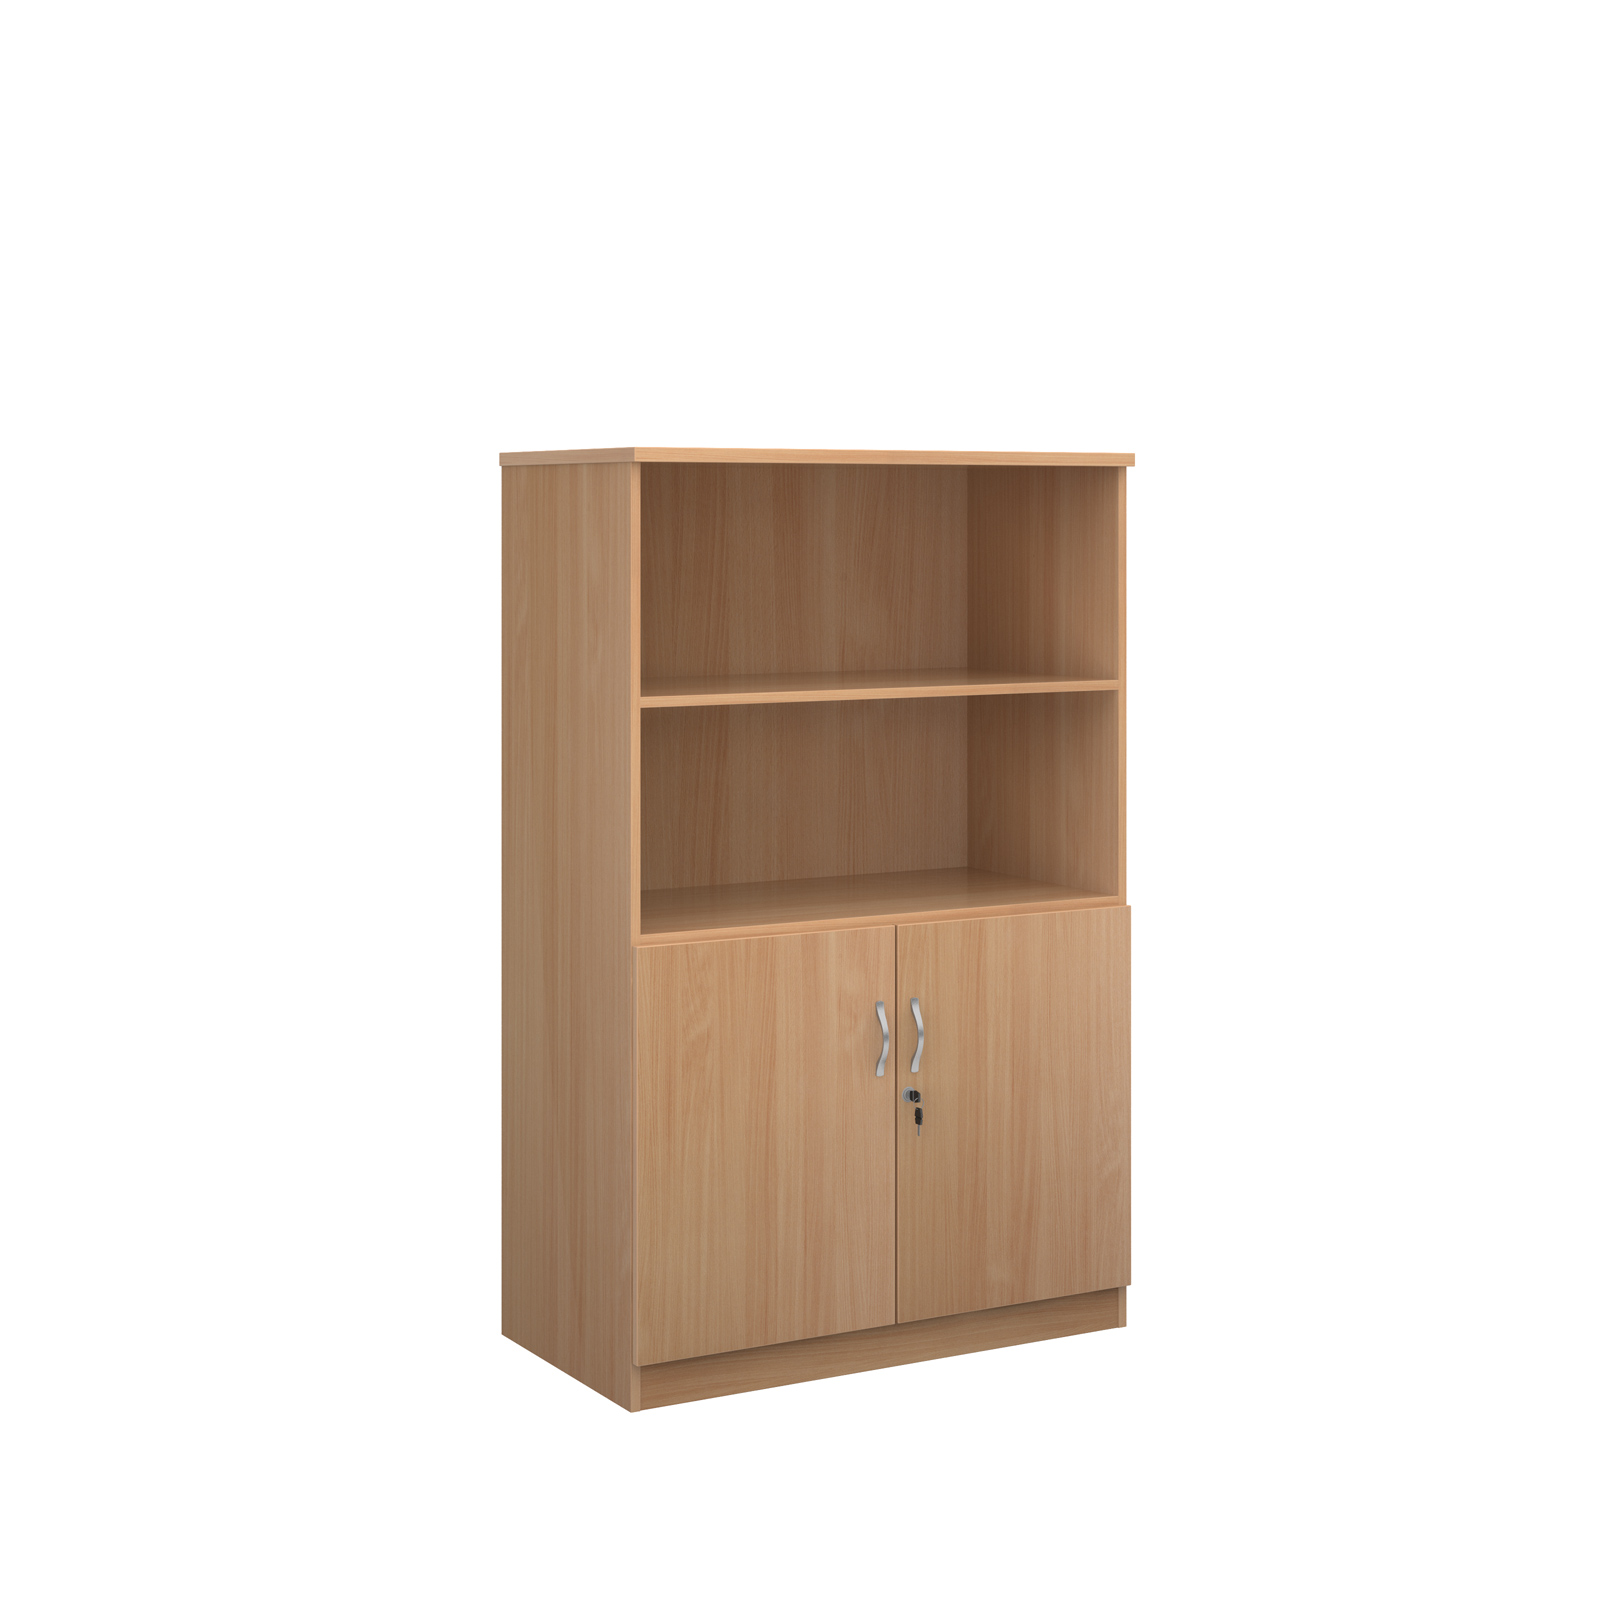 Deluxe combination unit with open top 1600mm high with 3 shelves - beech